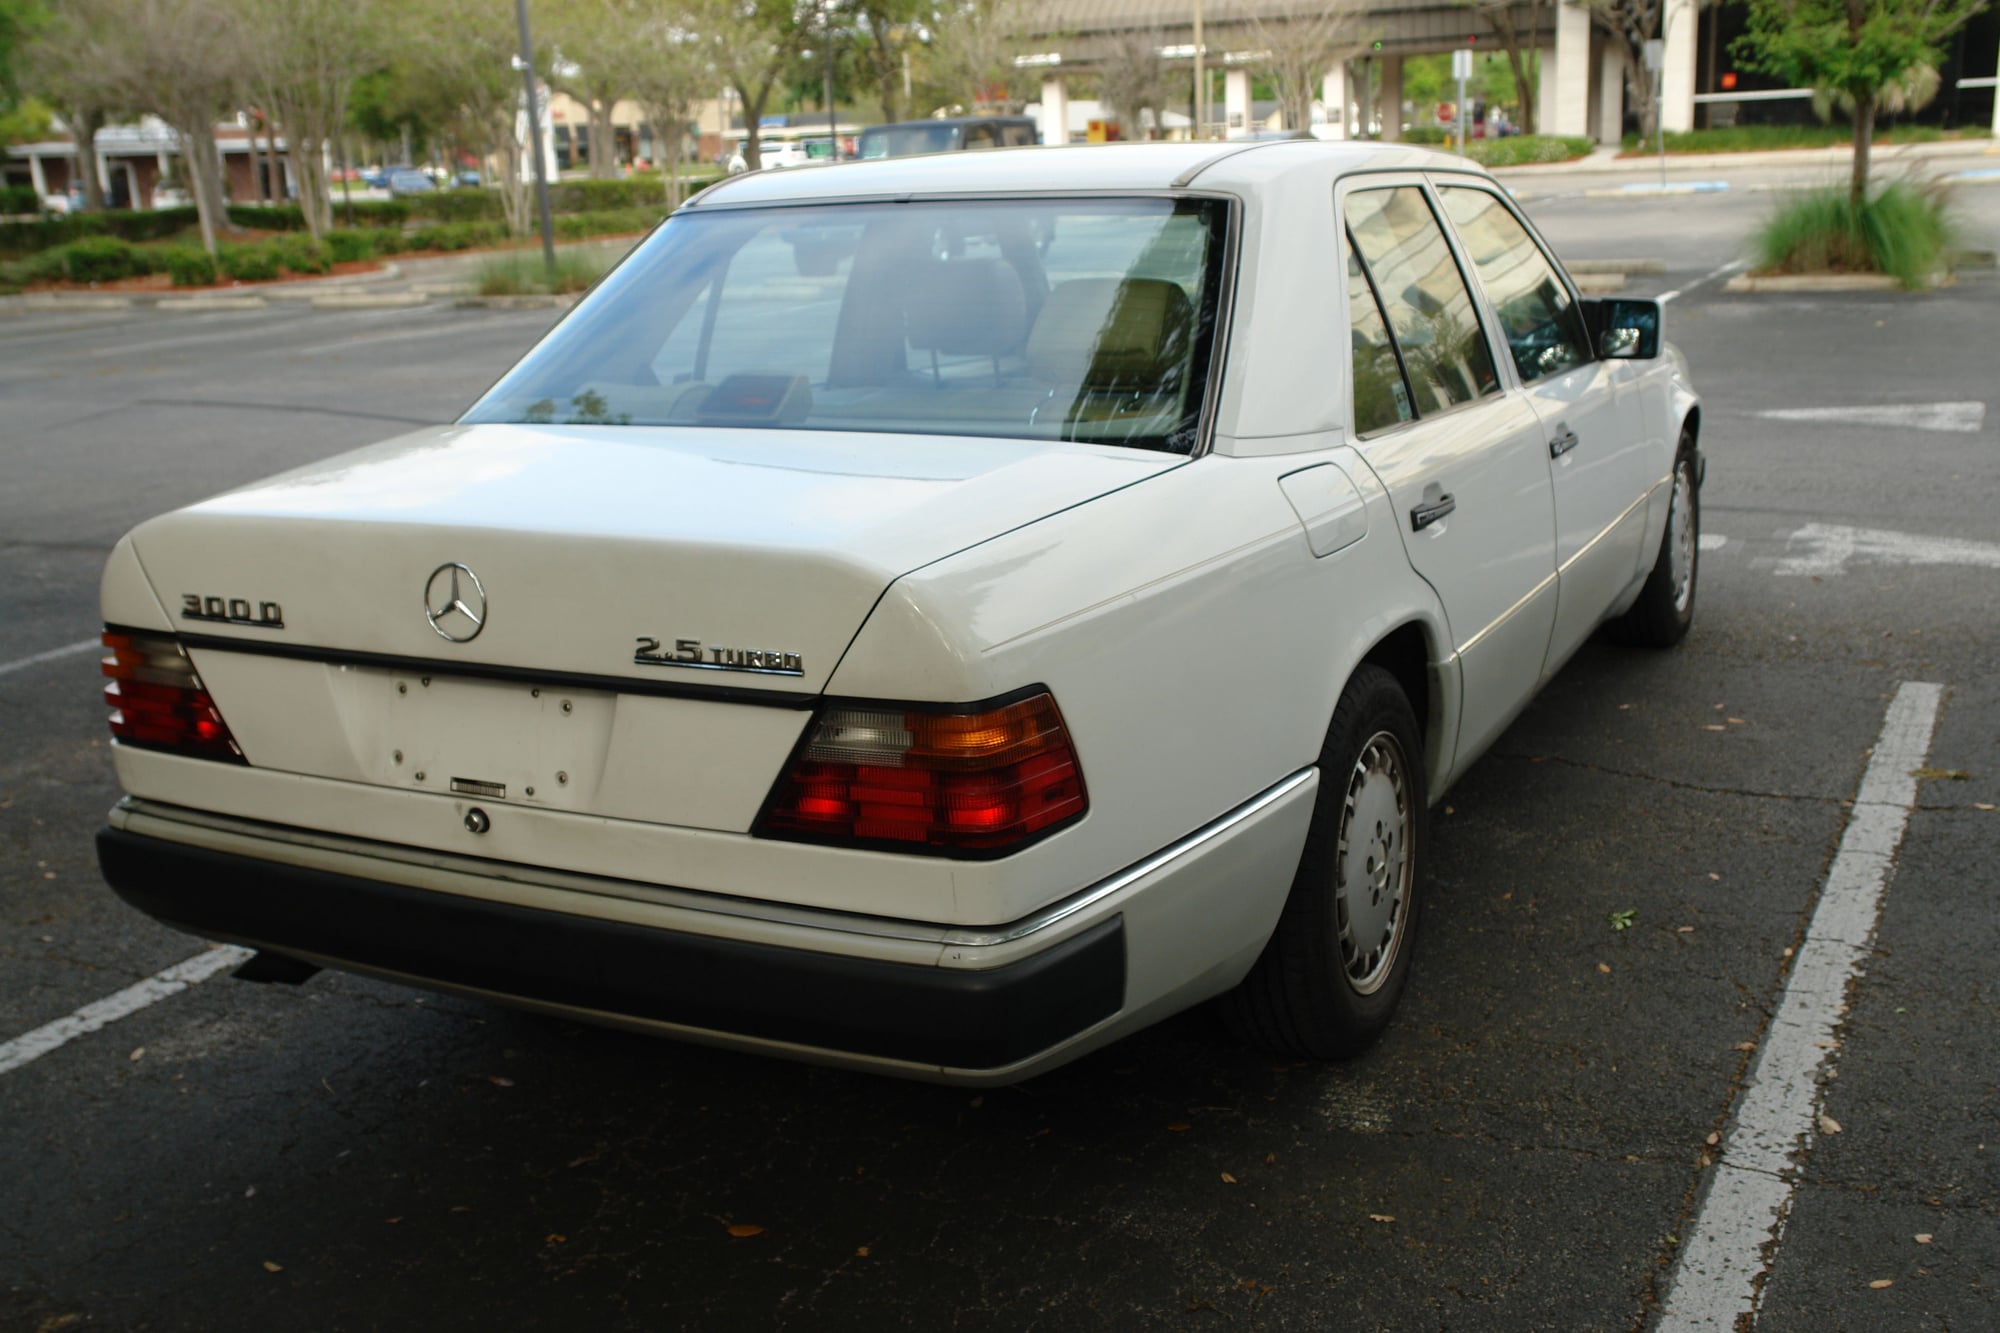 1991 Mercedes-Benz 300D - 91 Mercedes 300D Low Miles No Reserve eBay Auction - Used - VIN WDBEB28D5MB411065 - 168,544 Miles - 5 cyl - 2WD - Automatic - Sedan - White - St Petersburg, FL 33701, United States